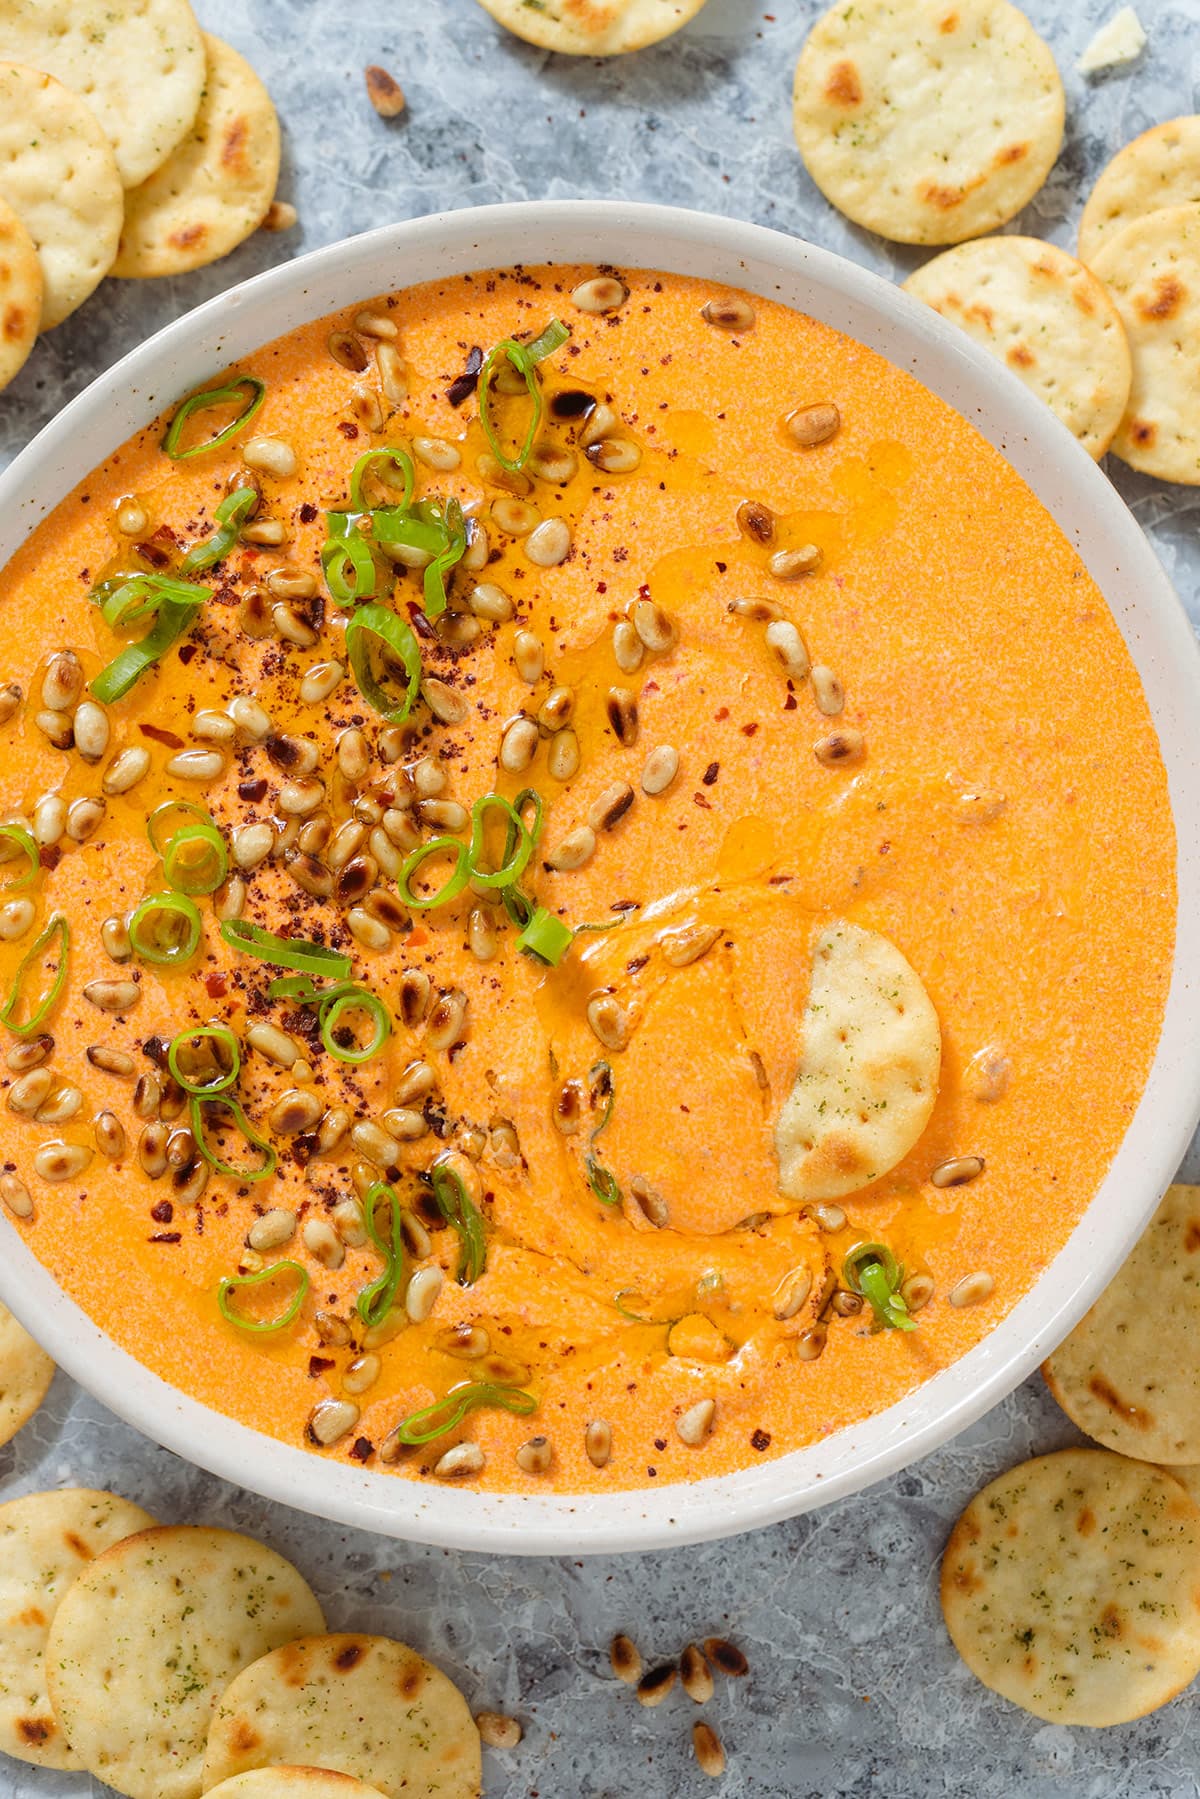 Bright orange dip in a beige bowl garnished with toasted pine nuts, spring onion, and ground sumac, with round crackers around the bowl and one inserted into the dip on the right side of the bowl.